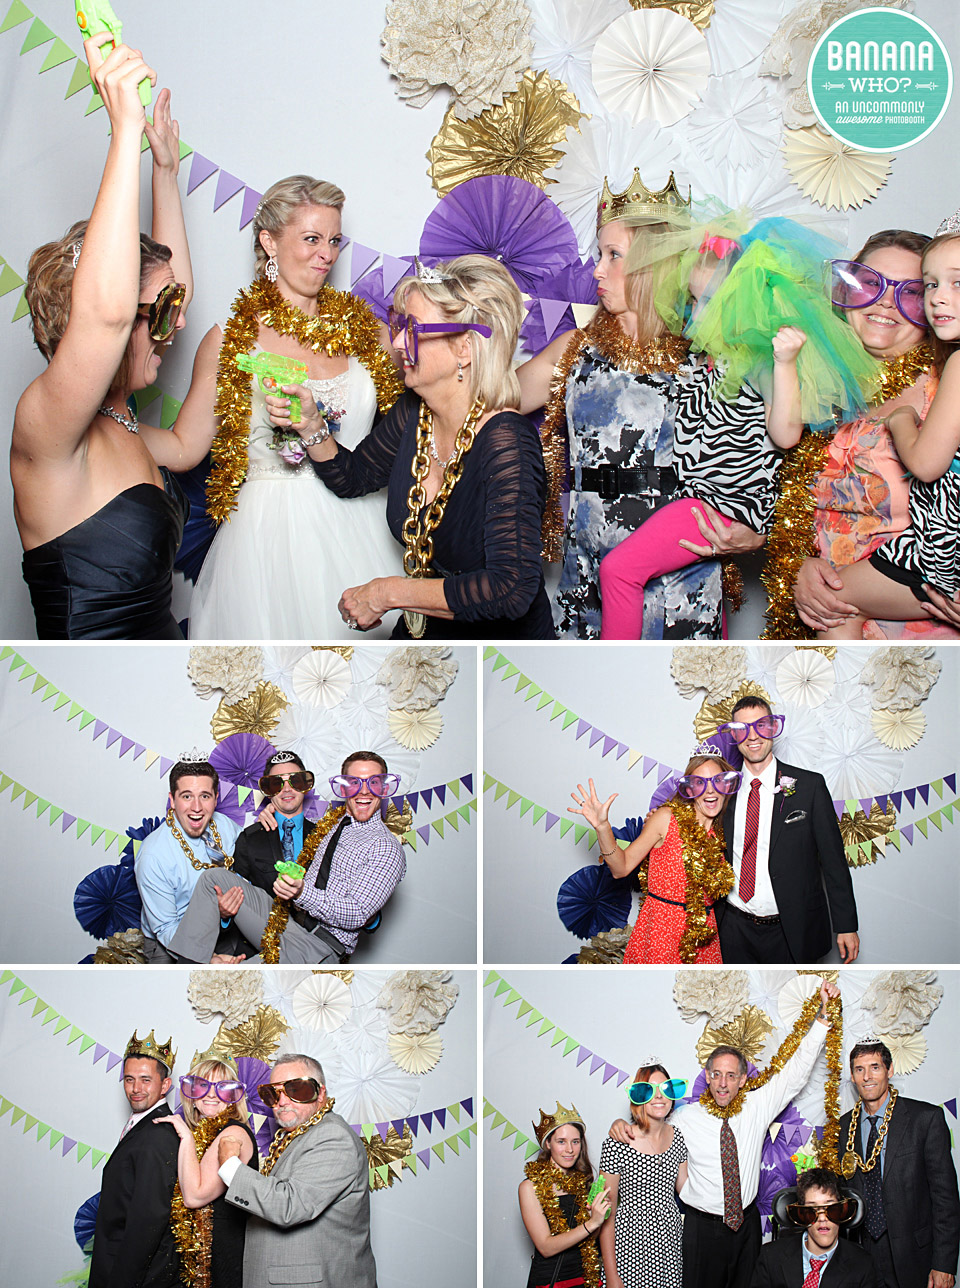 Parties and events, Best Kansas City photo booths, Family, fun receptions, Allinder, Scott